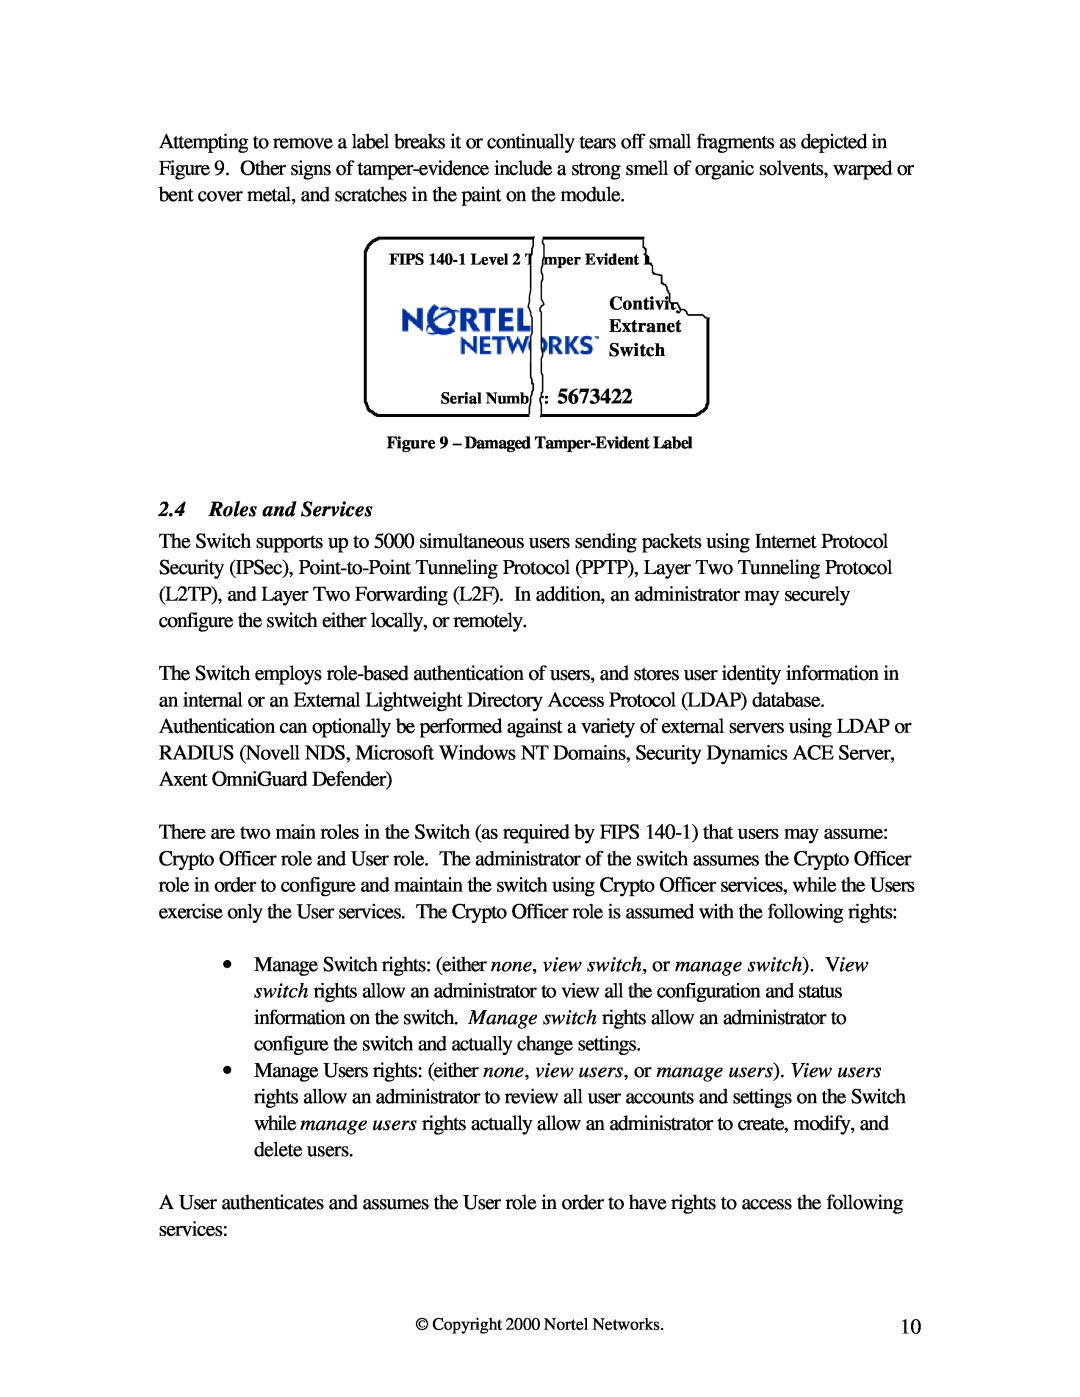 Nortel Networks 4500 FIPS manual Roles and Services, Extranet Switch 